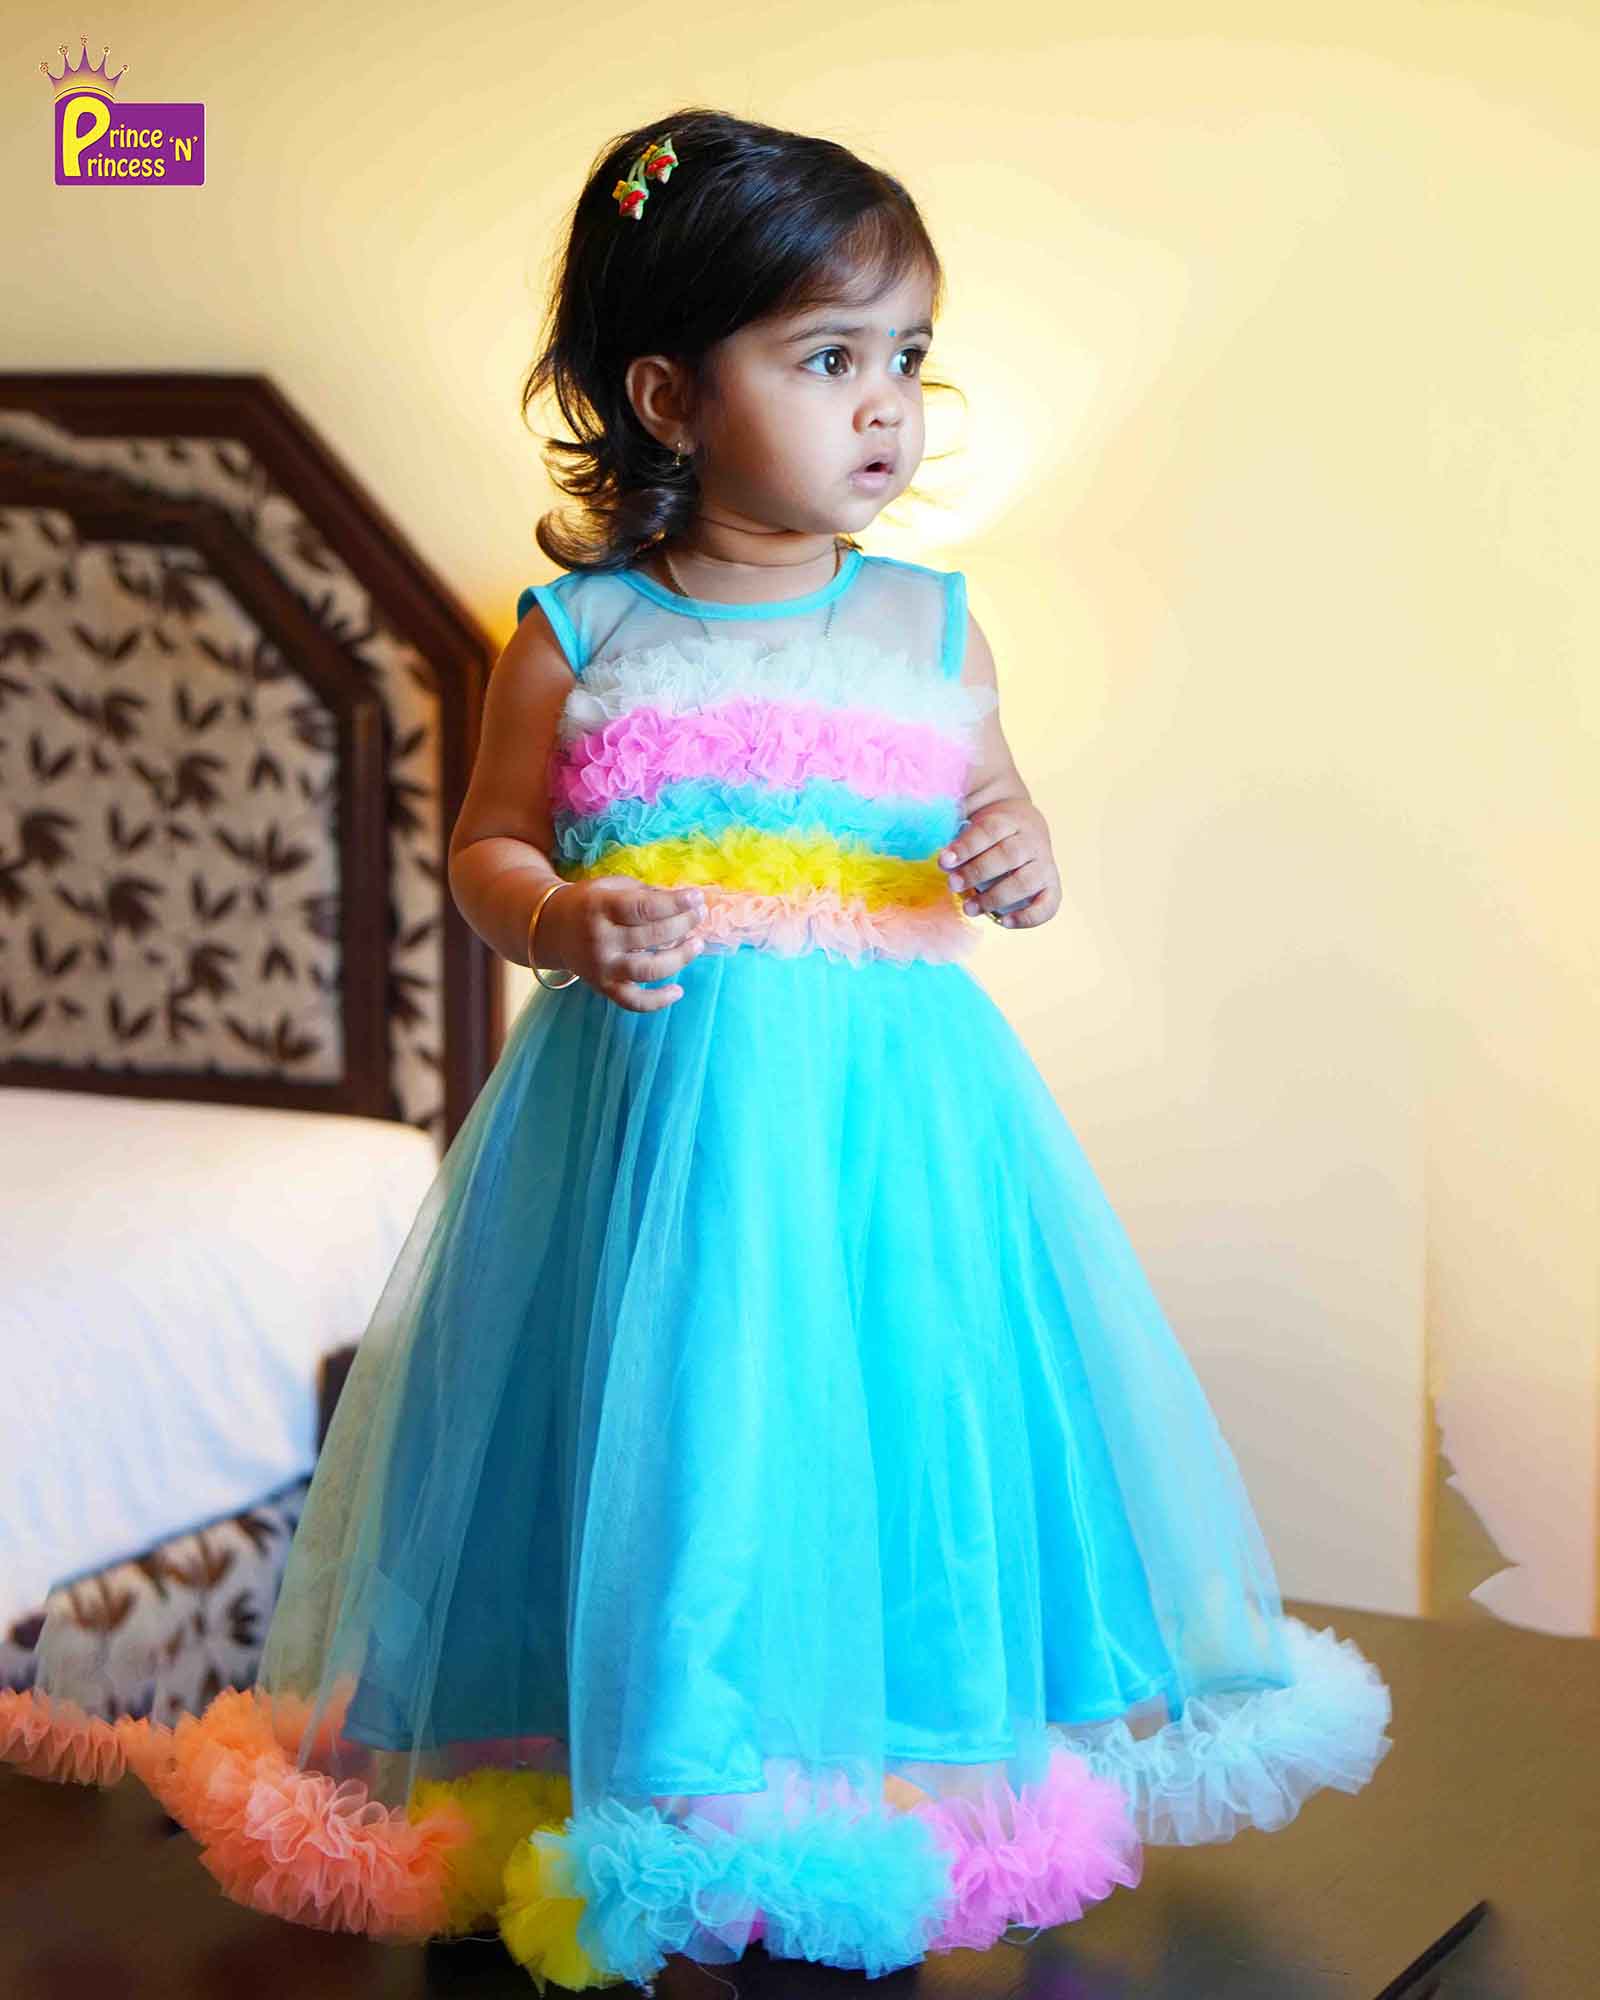 Toy Balloon Kids Sky Blue Emblished Full Length Girls Gown Dress :  Amazon.in: Toys & Games